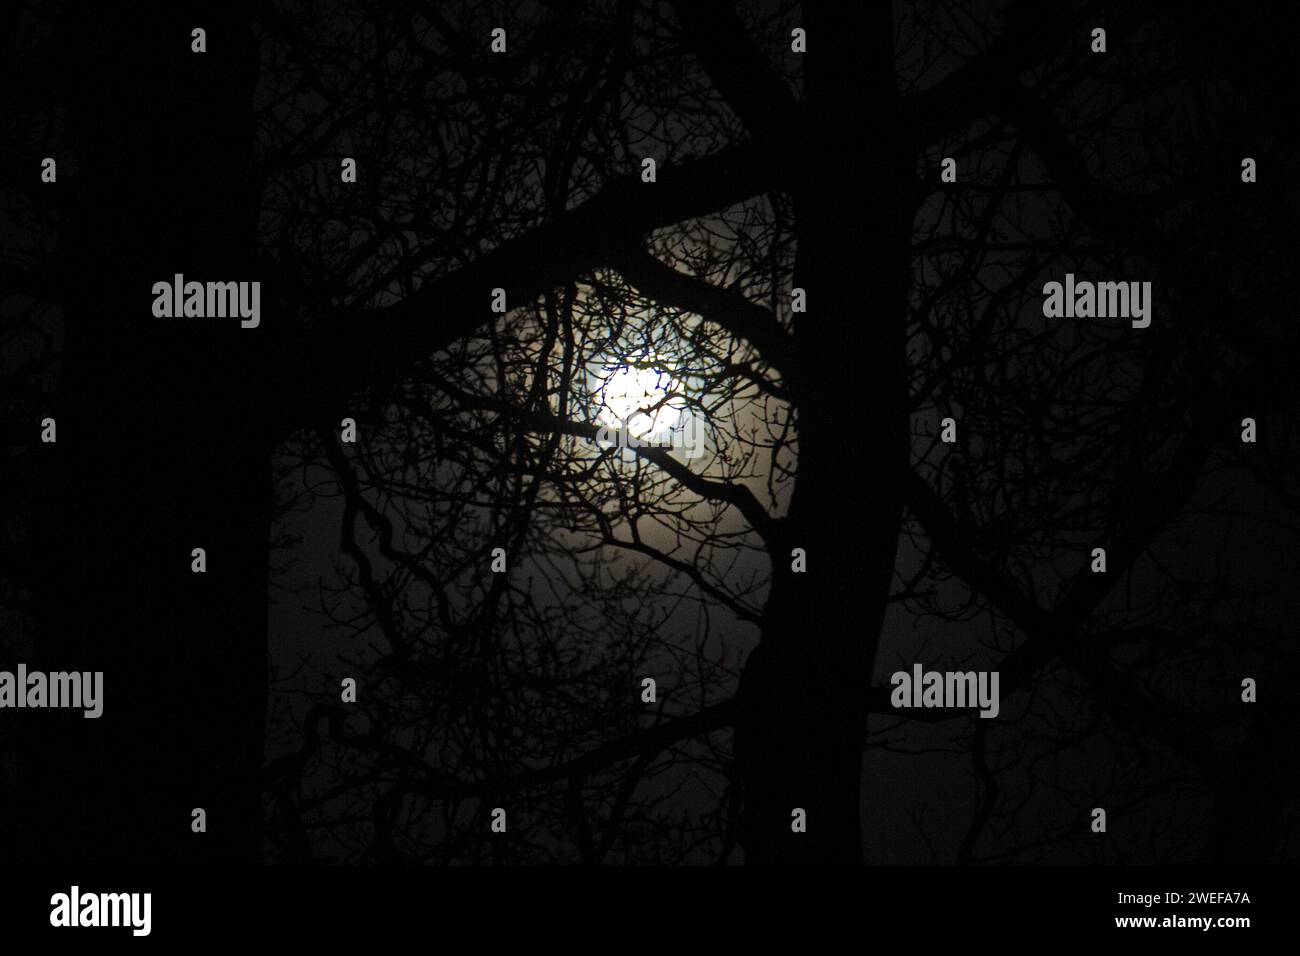 Full moon shining through leafless branches of old trees Stock Photo